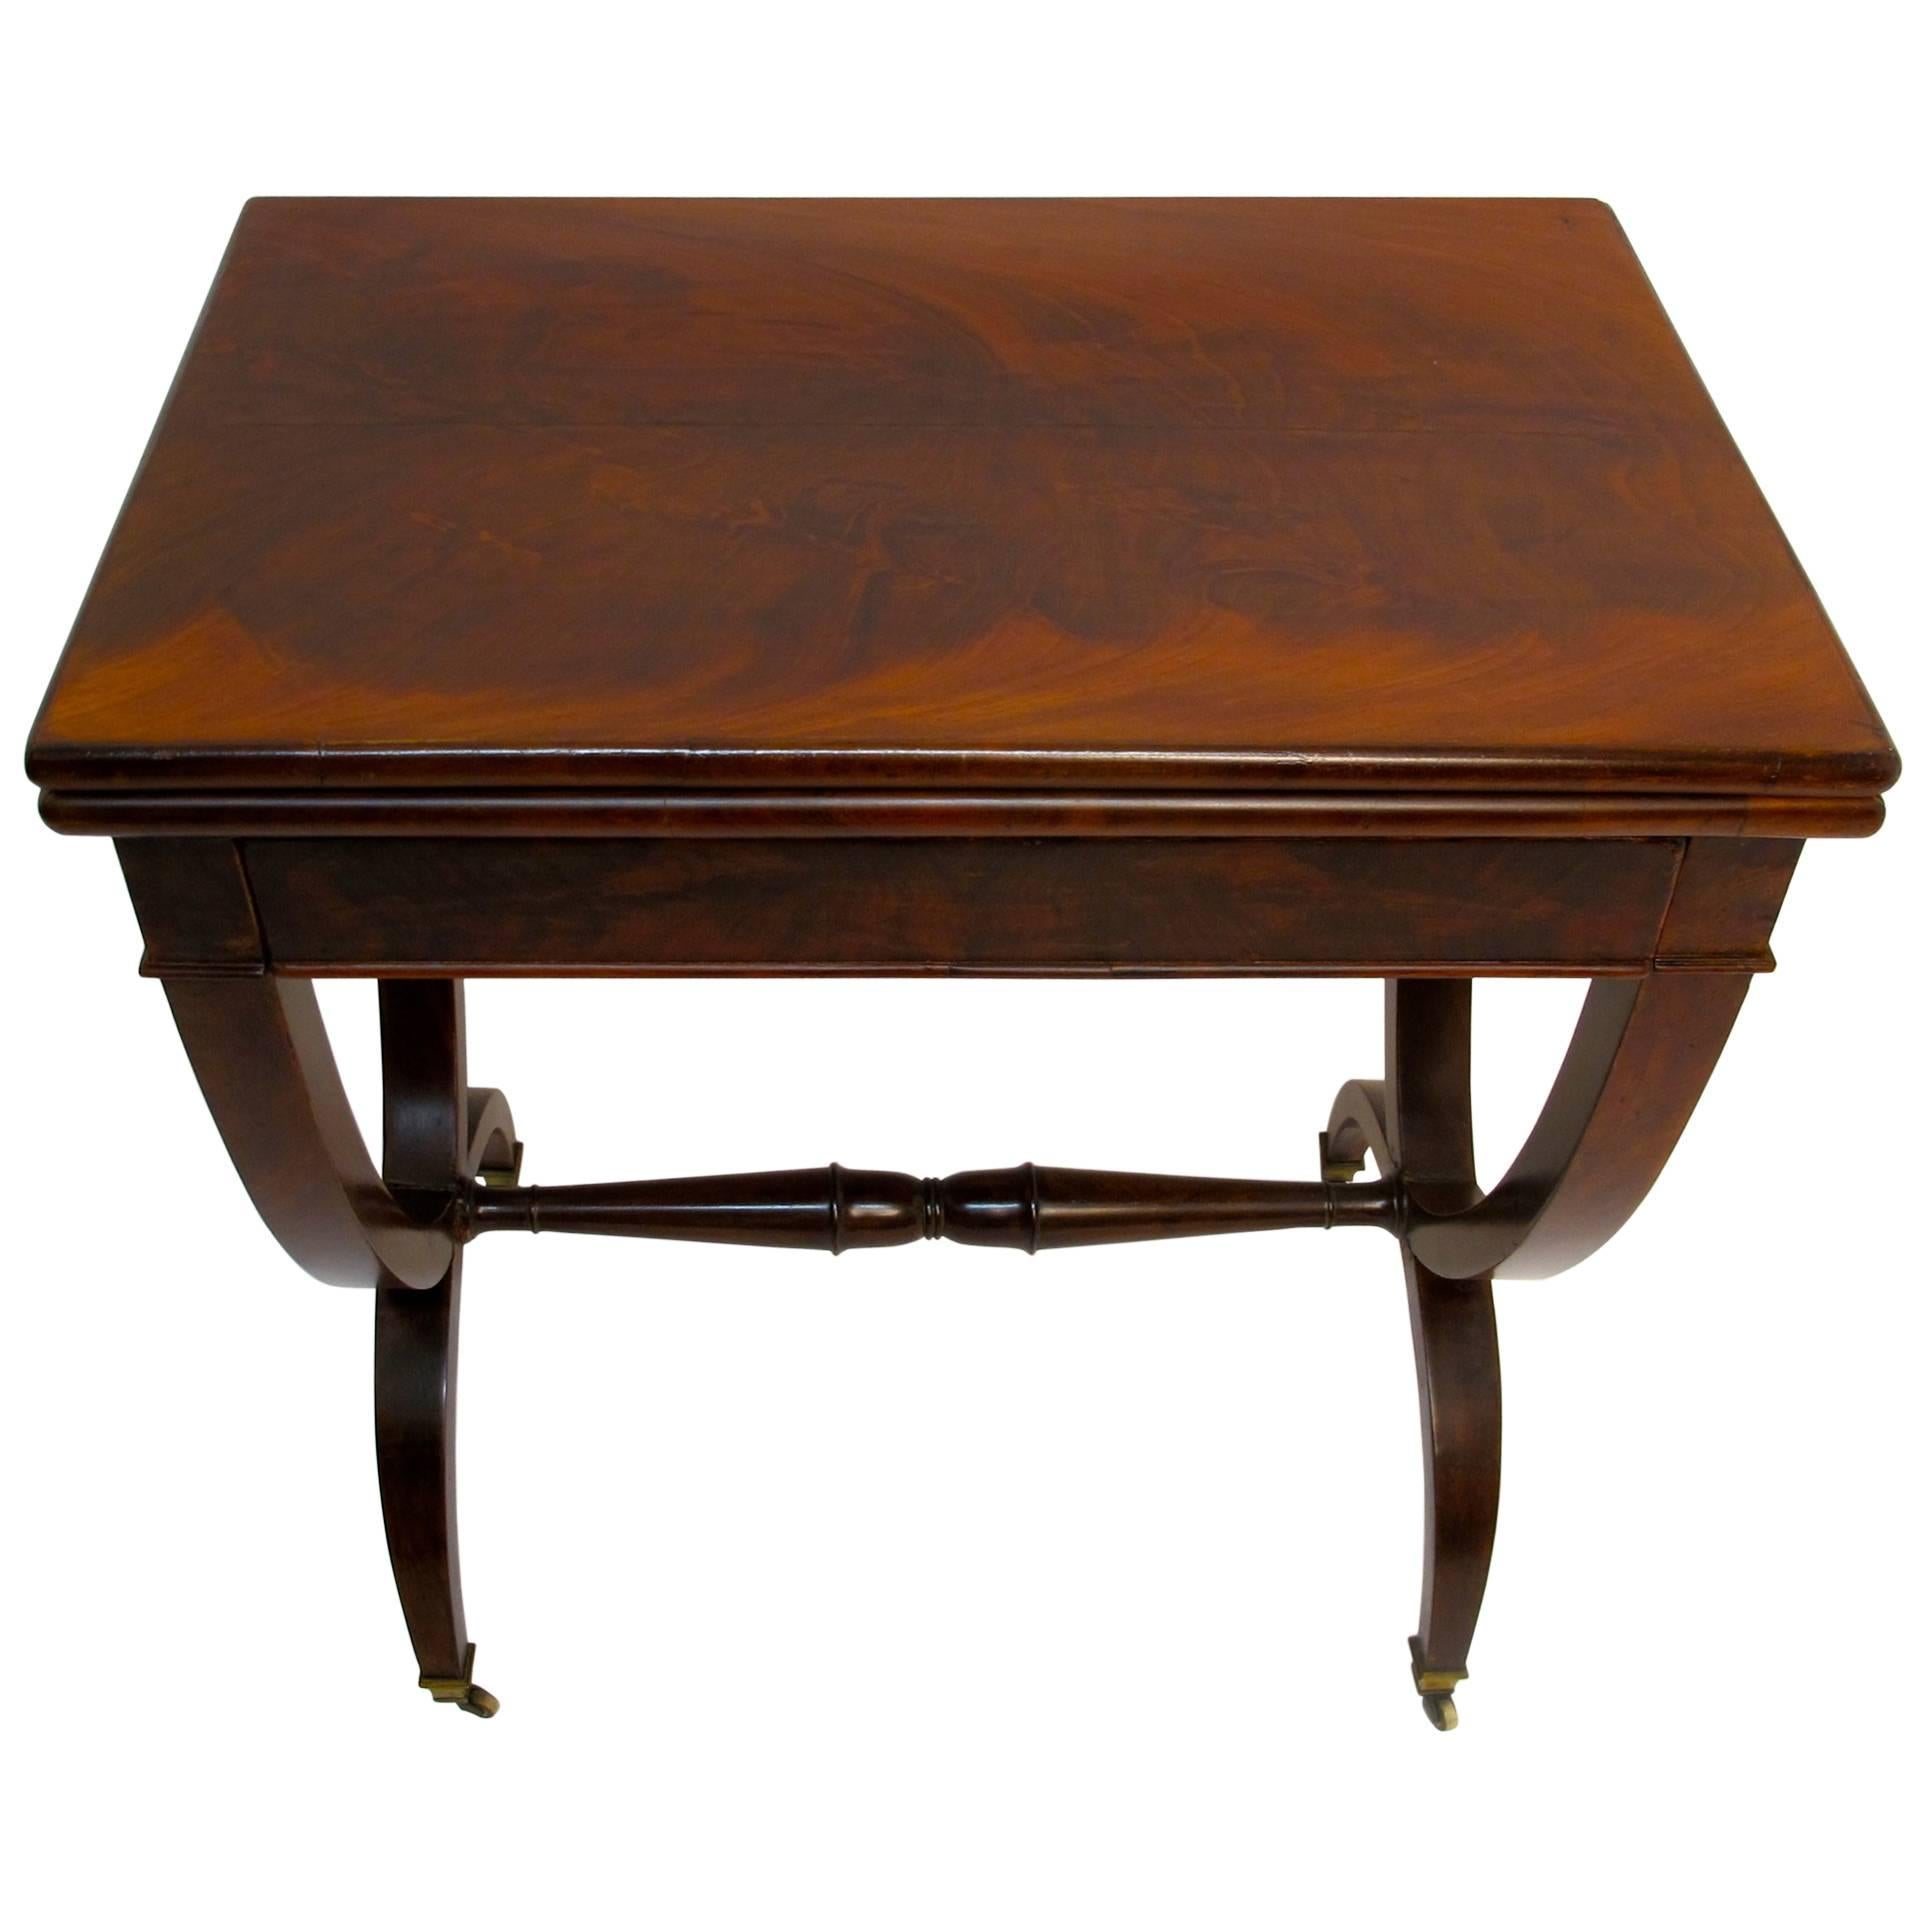 Early 19th Century English Regency Game and Side Table